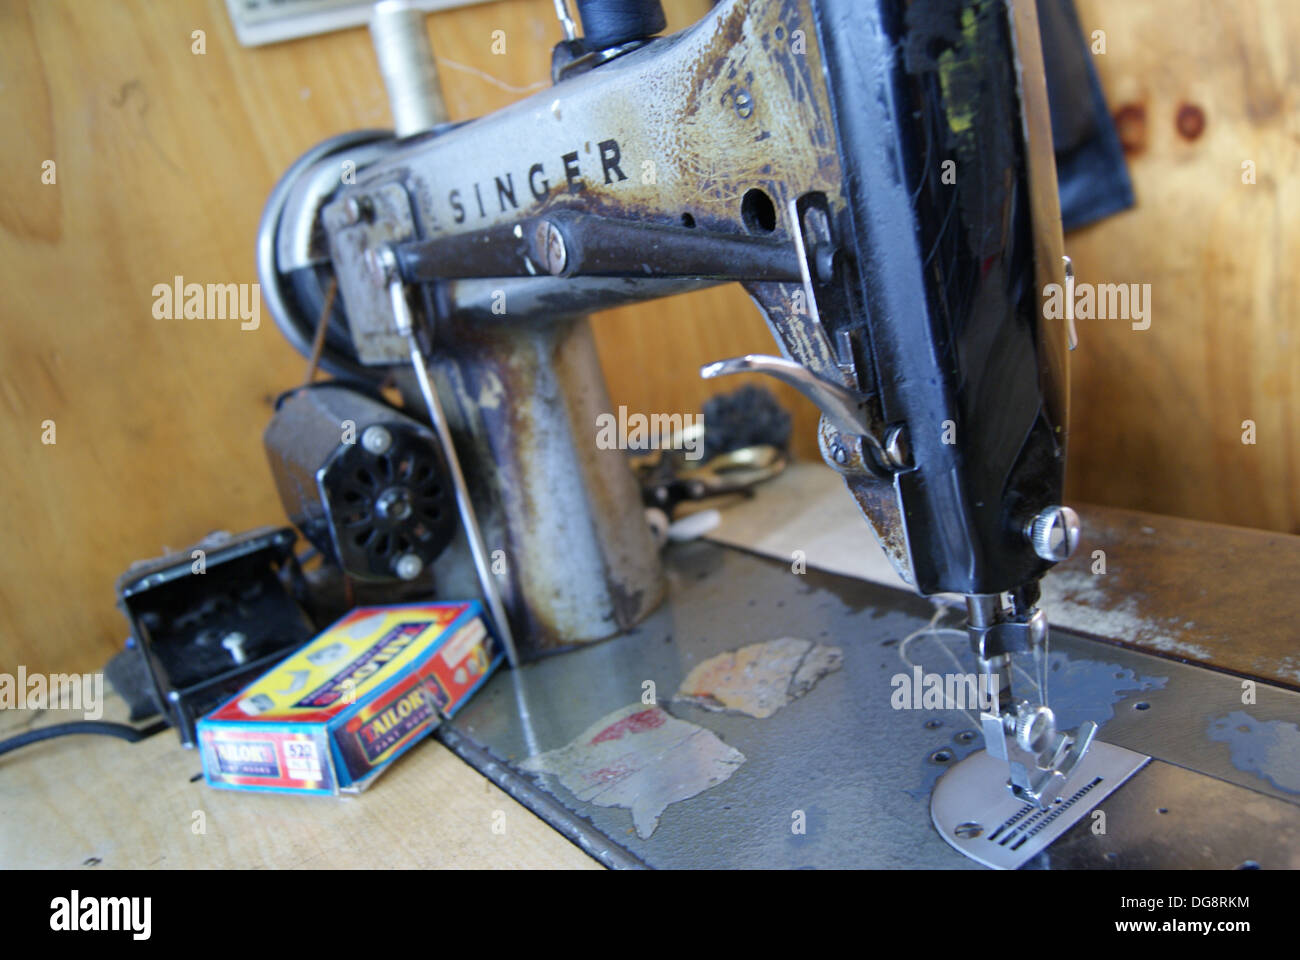 Singer sewing machine shop in hi-res stock photography and images - Alamy